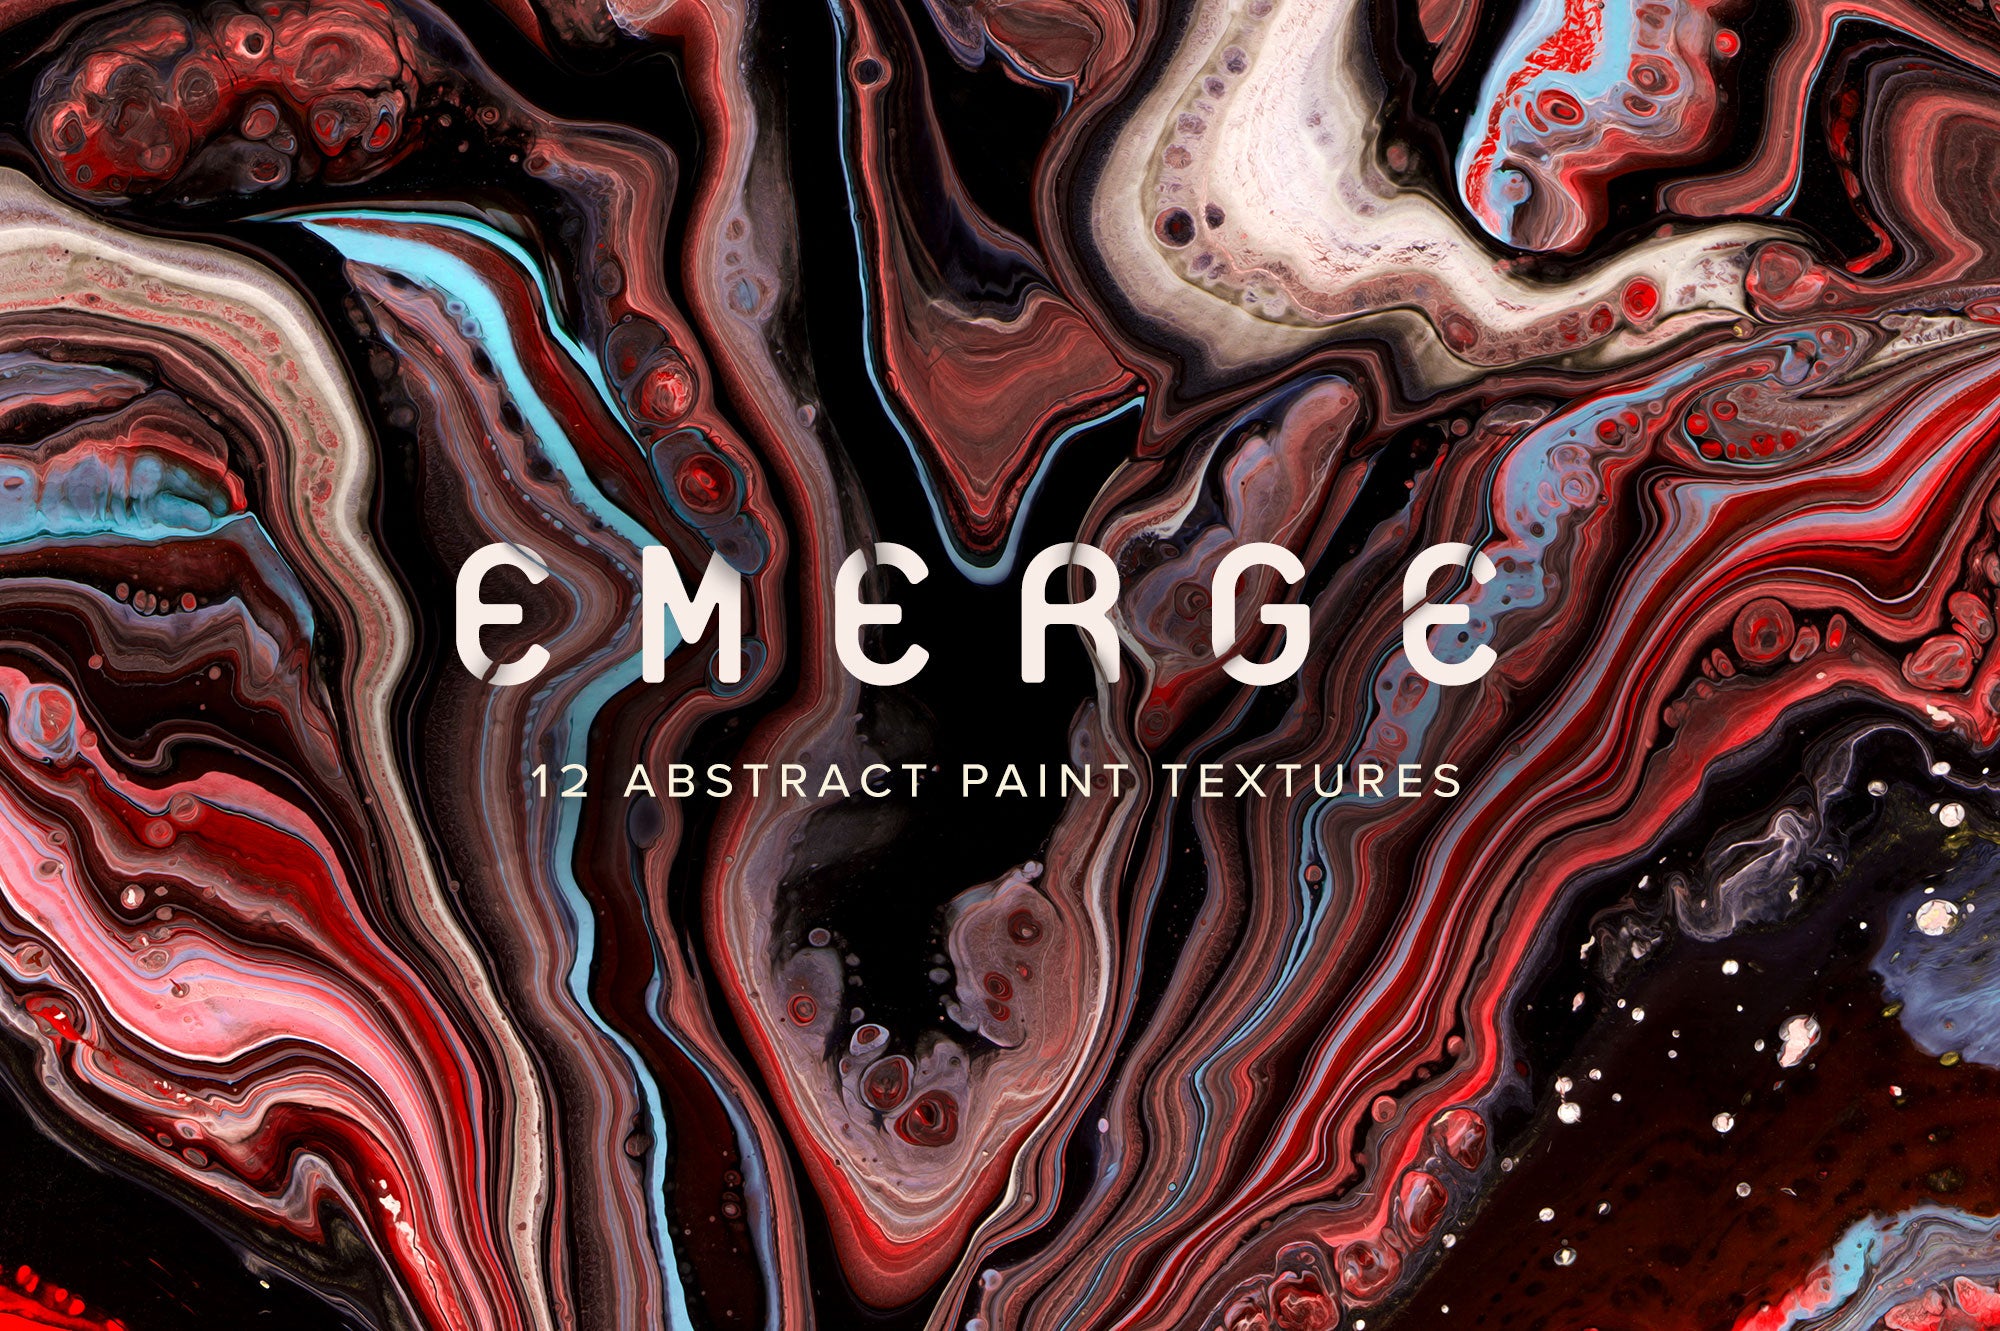 Emerge: 12 Abstract Paint Textures